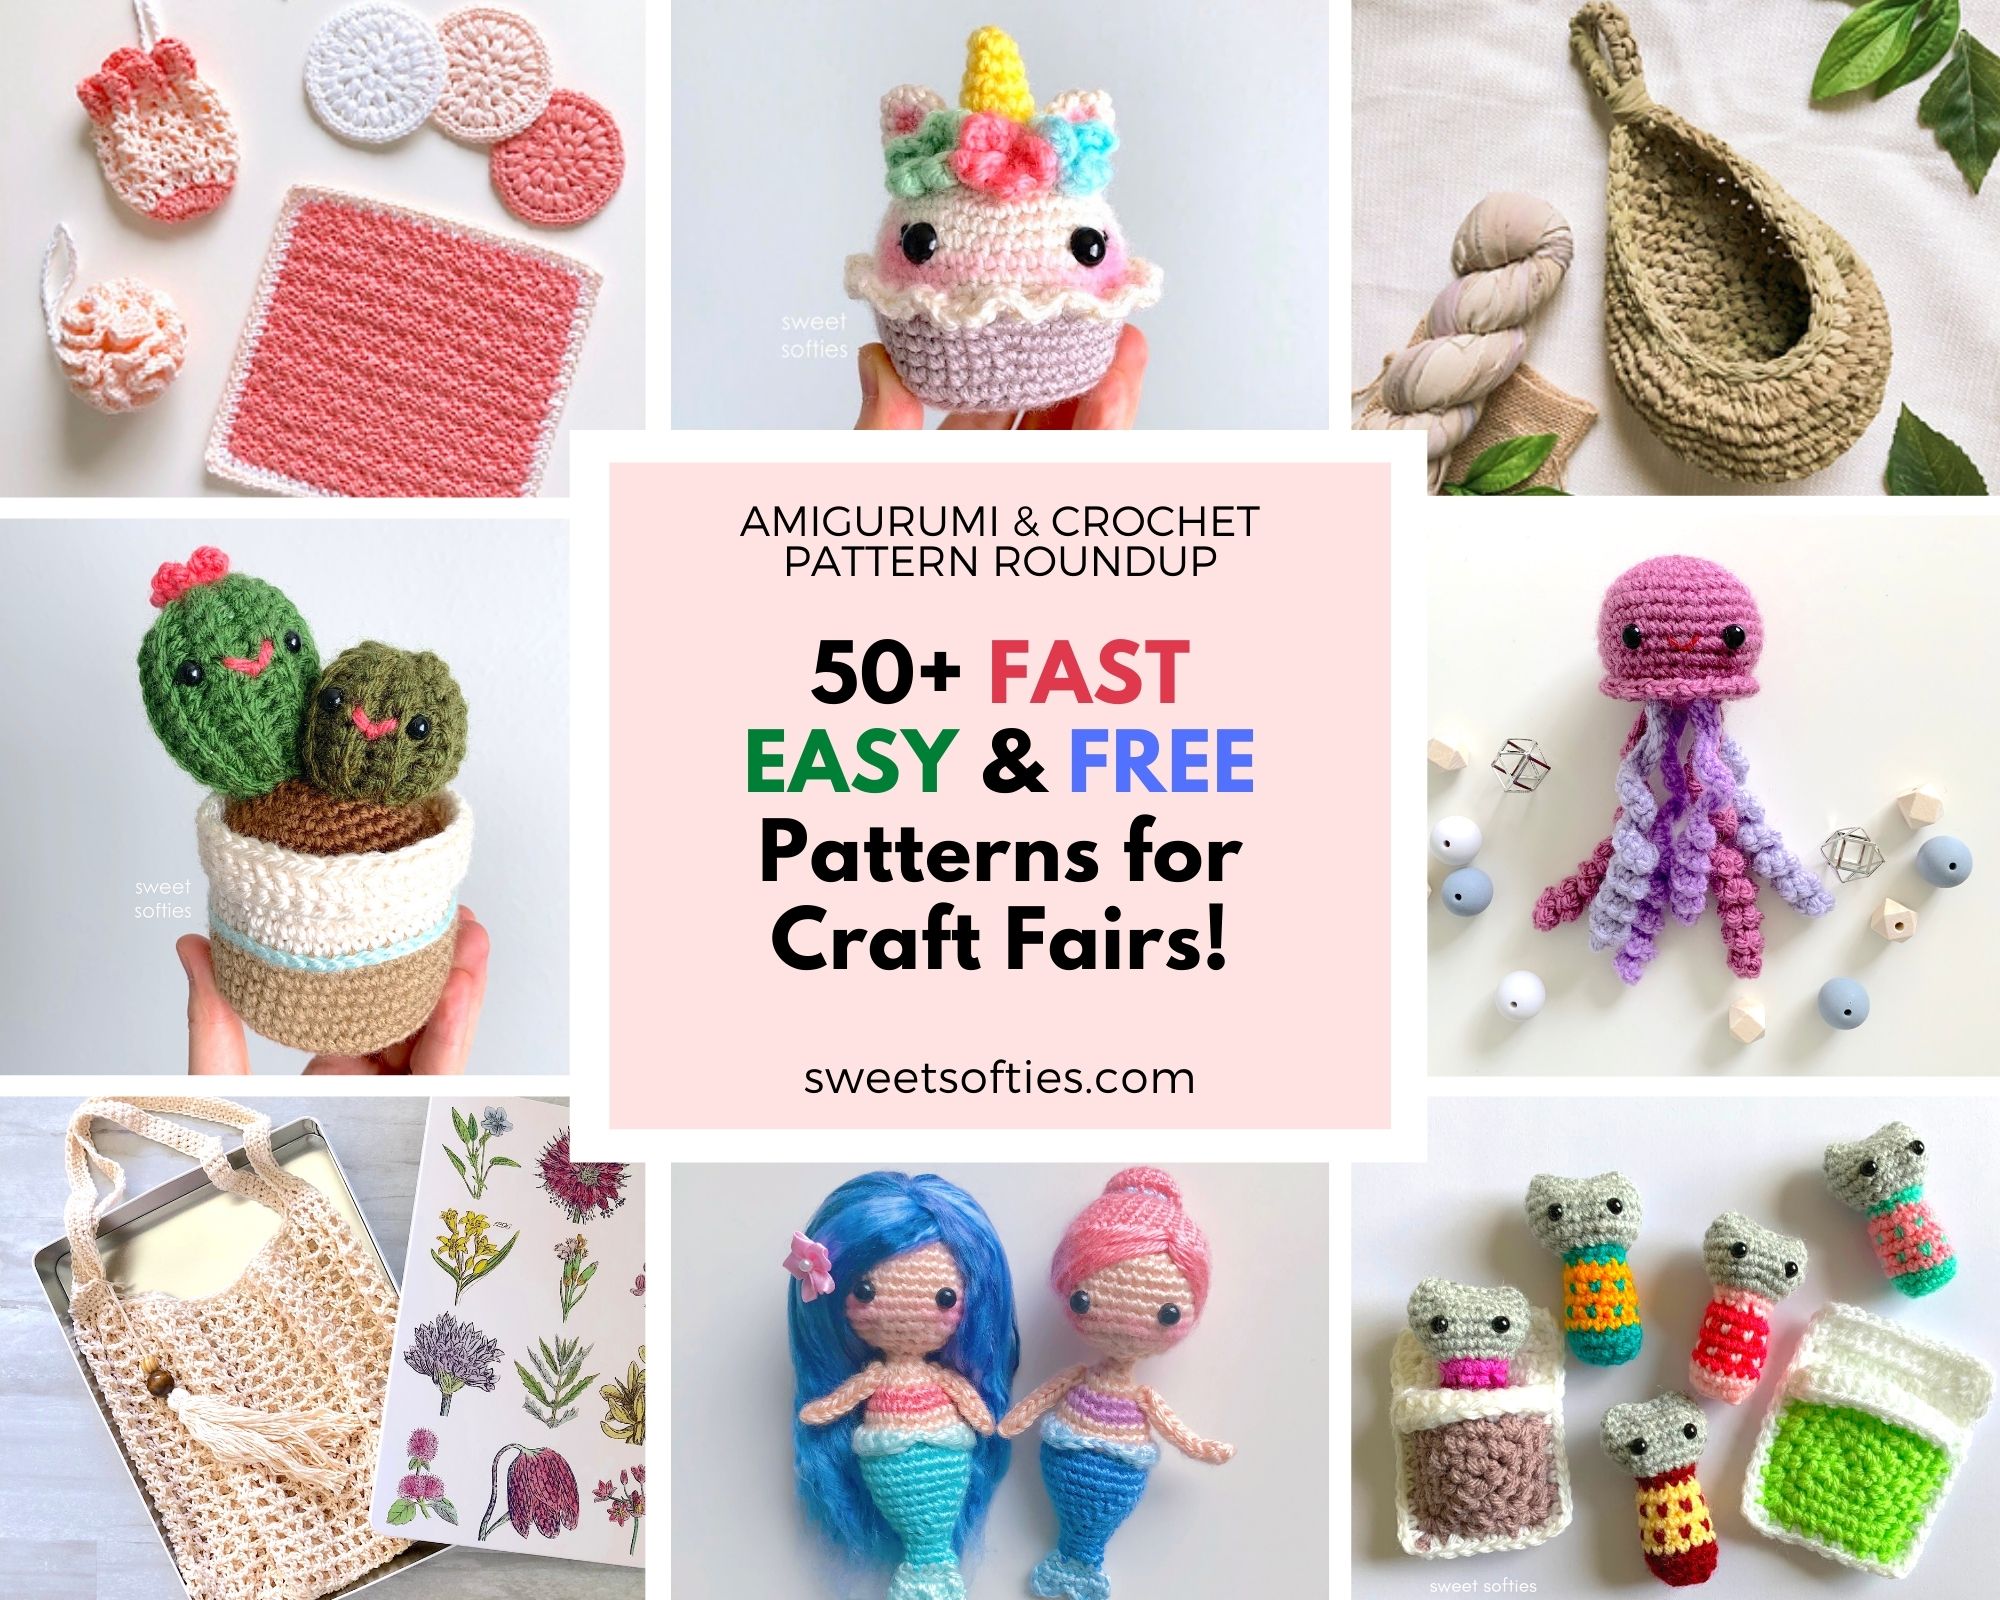 Micro crochet ideas for your next craft project